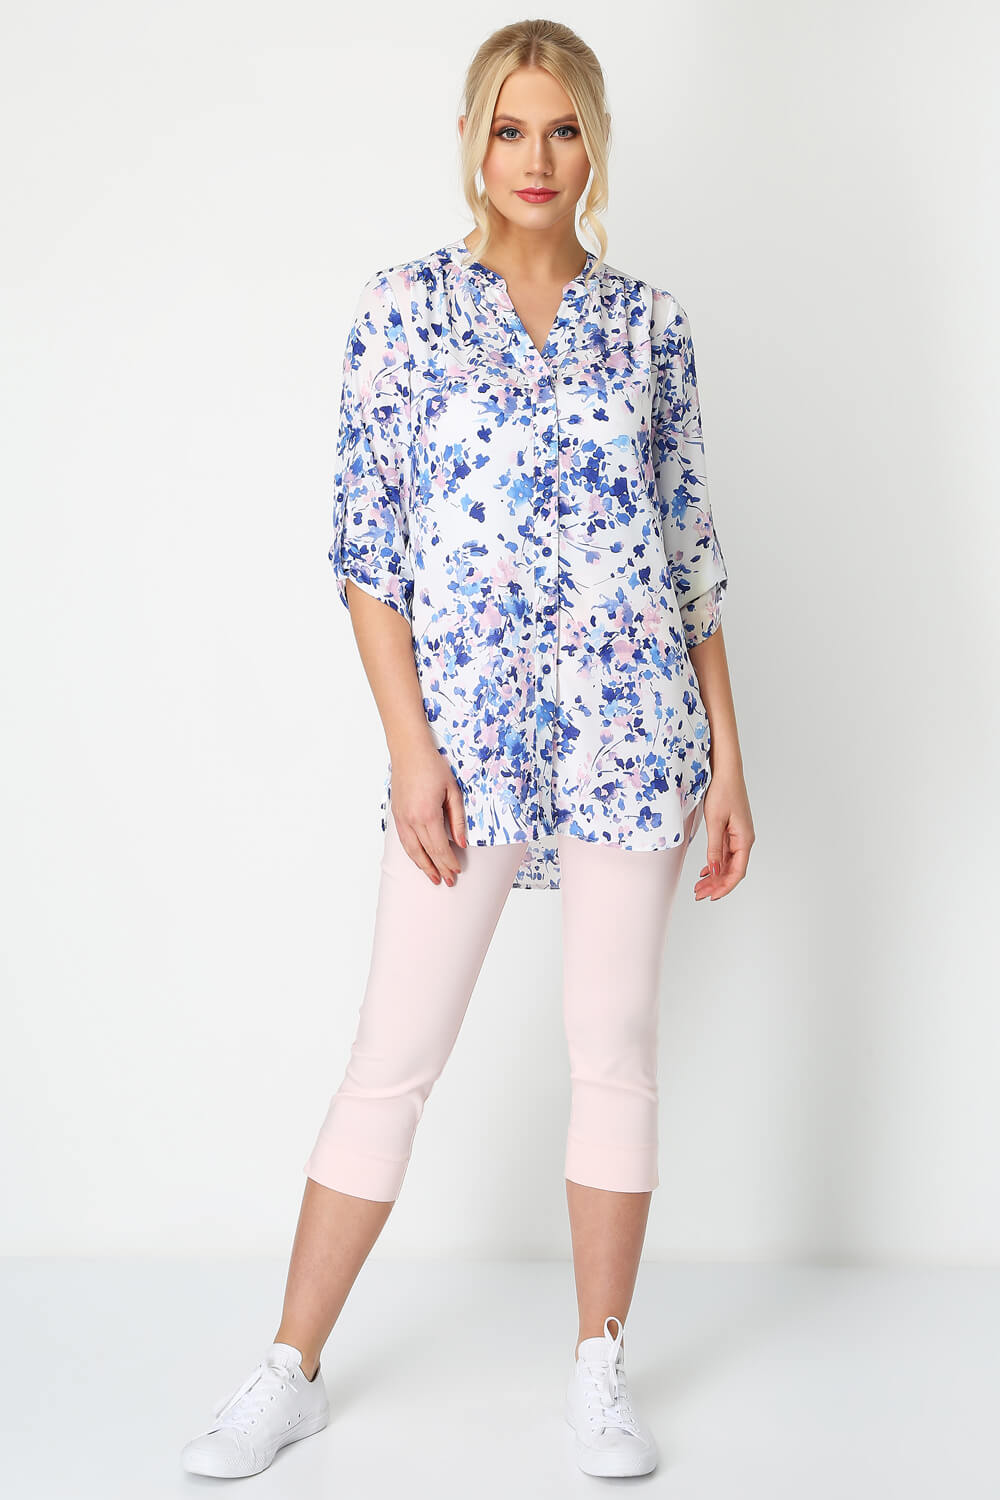 Blue Floral Print Roll Sleeve Shirt , Image 2 of 8